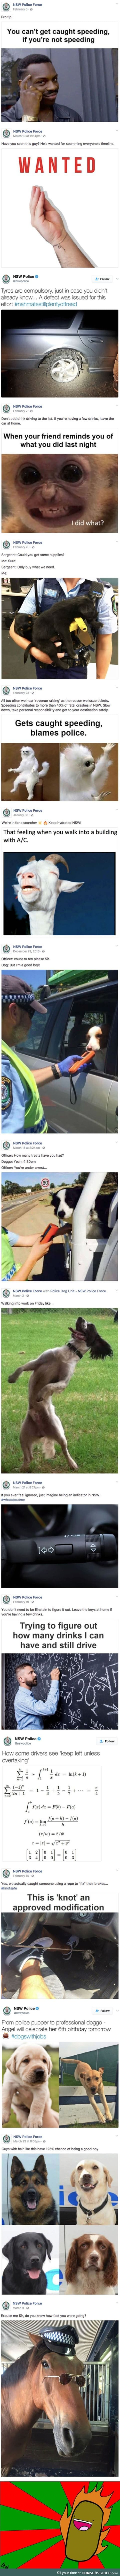 This police department is fighting crime with memes